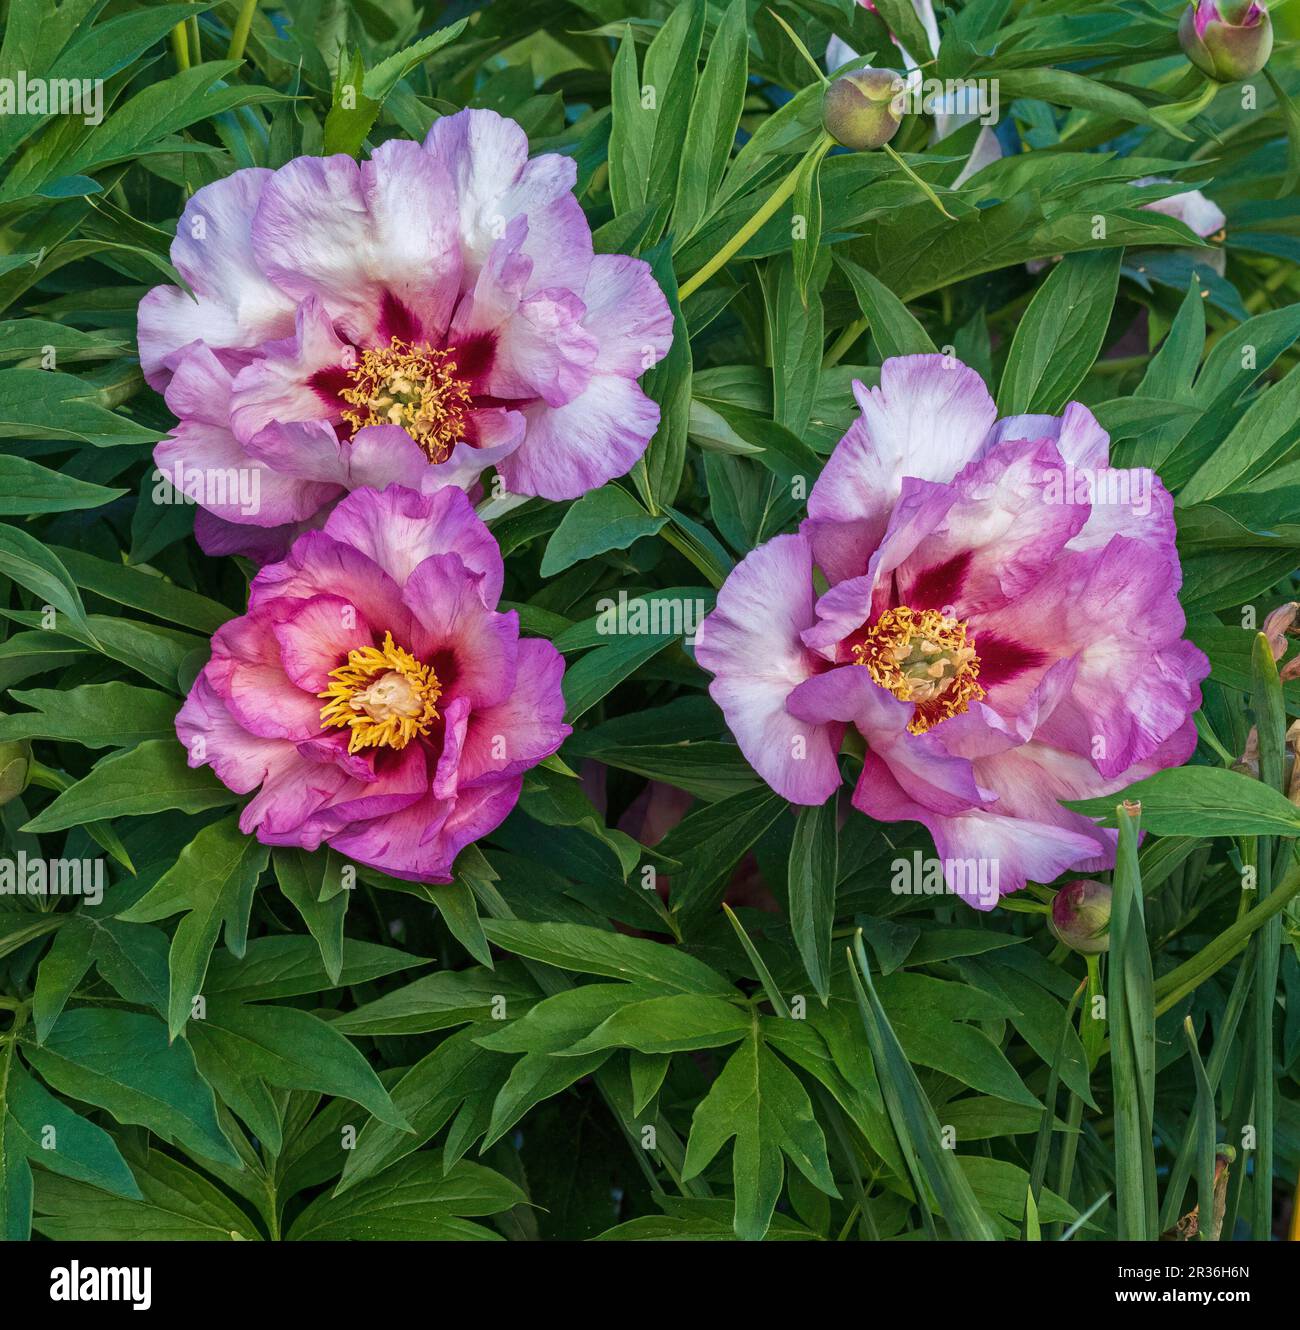 A cluster of three rose colored Peonies with fresh green leaves and beautiful unfurling petals growing next to each other in a garden. Stock Photo